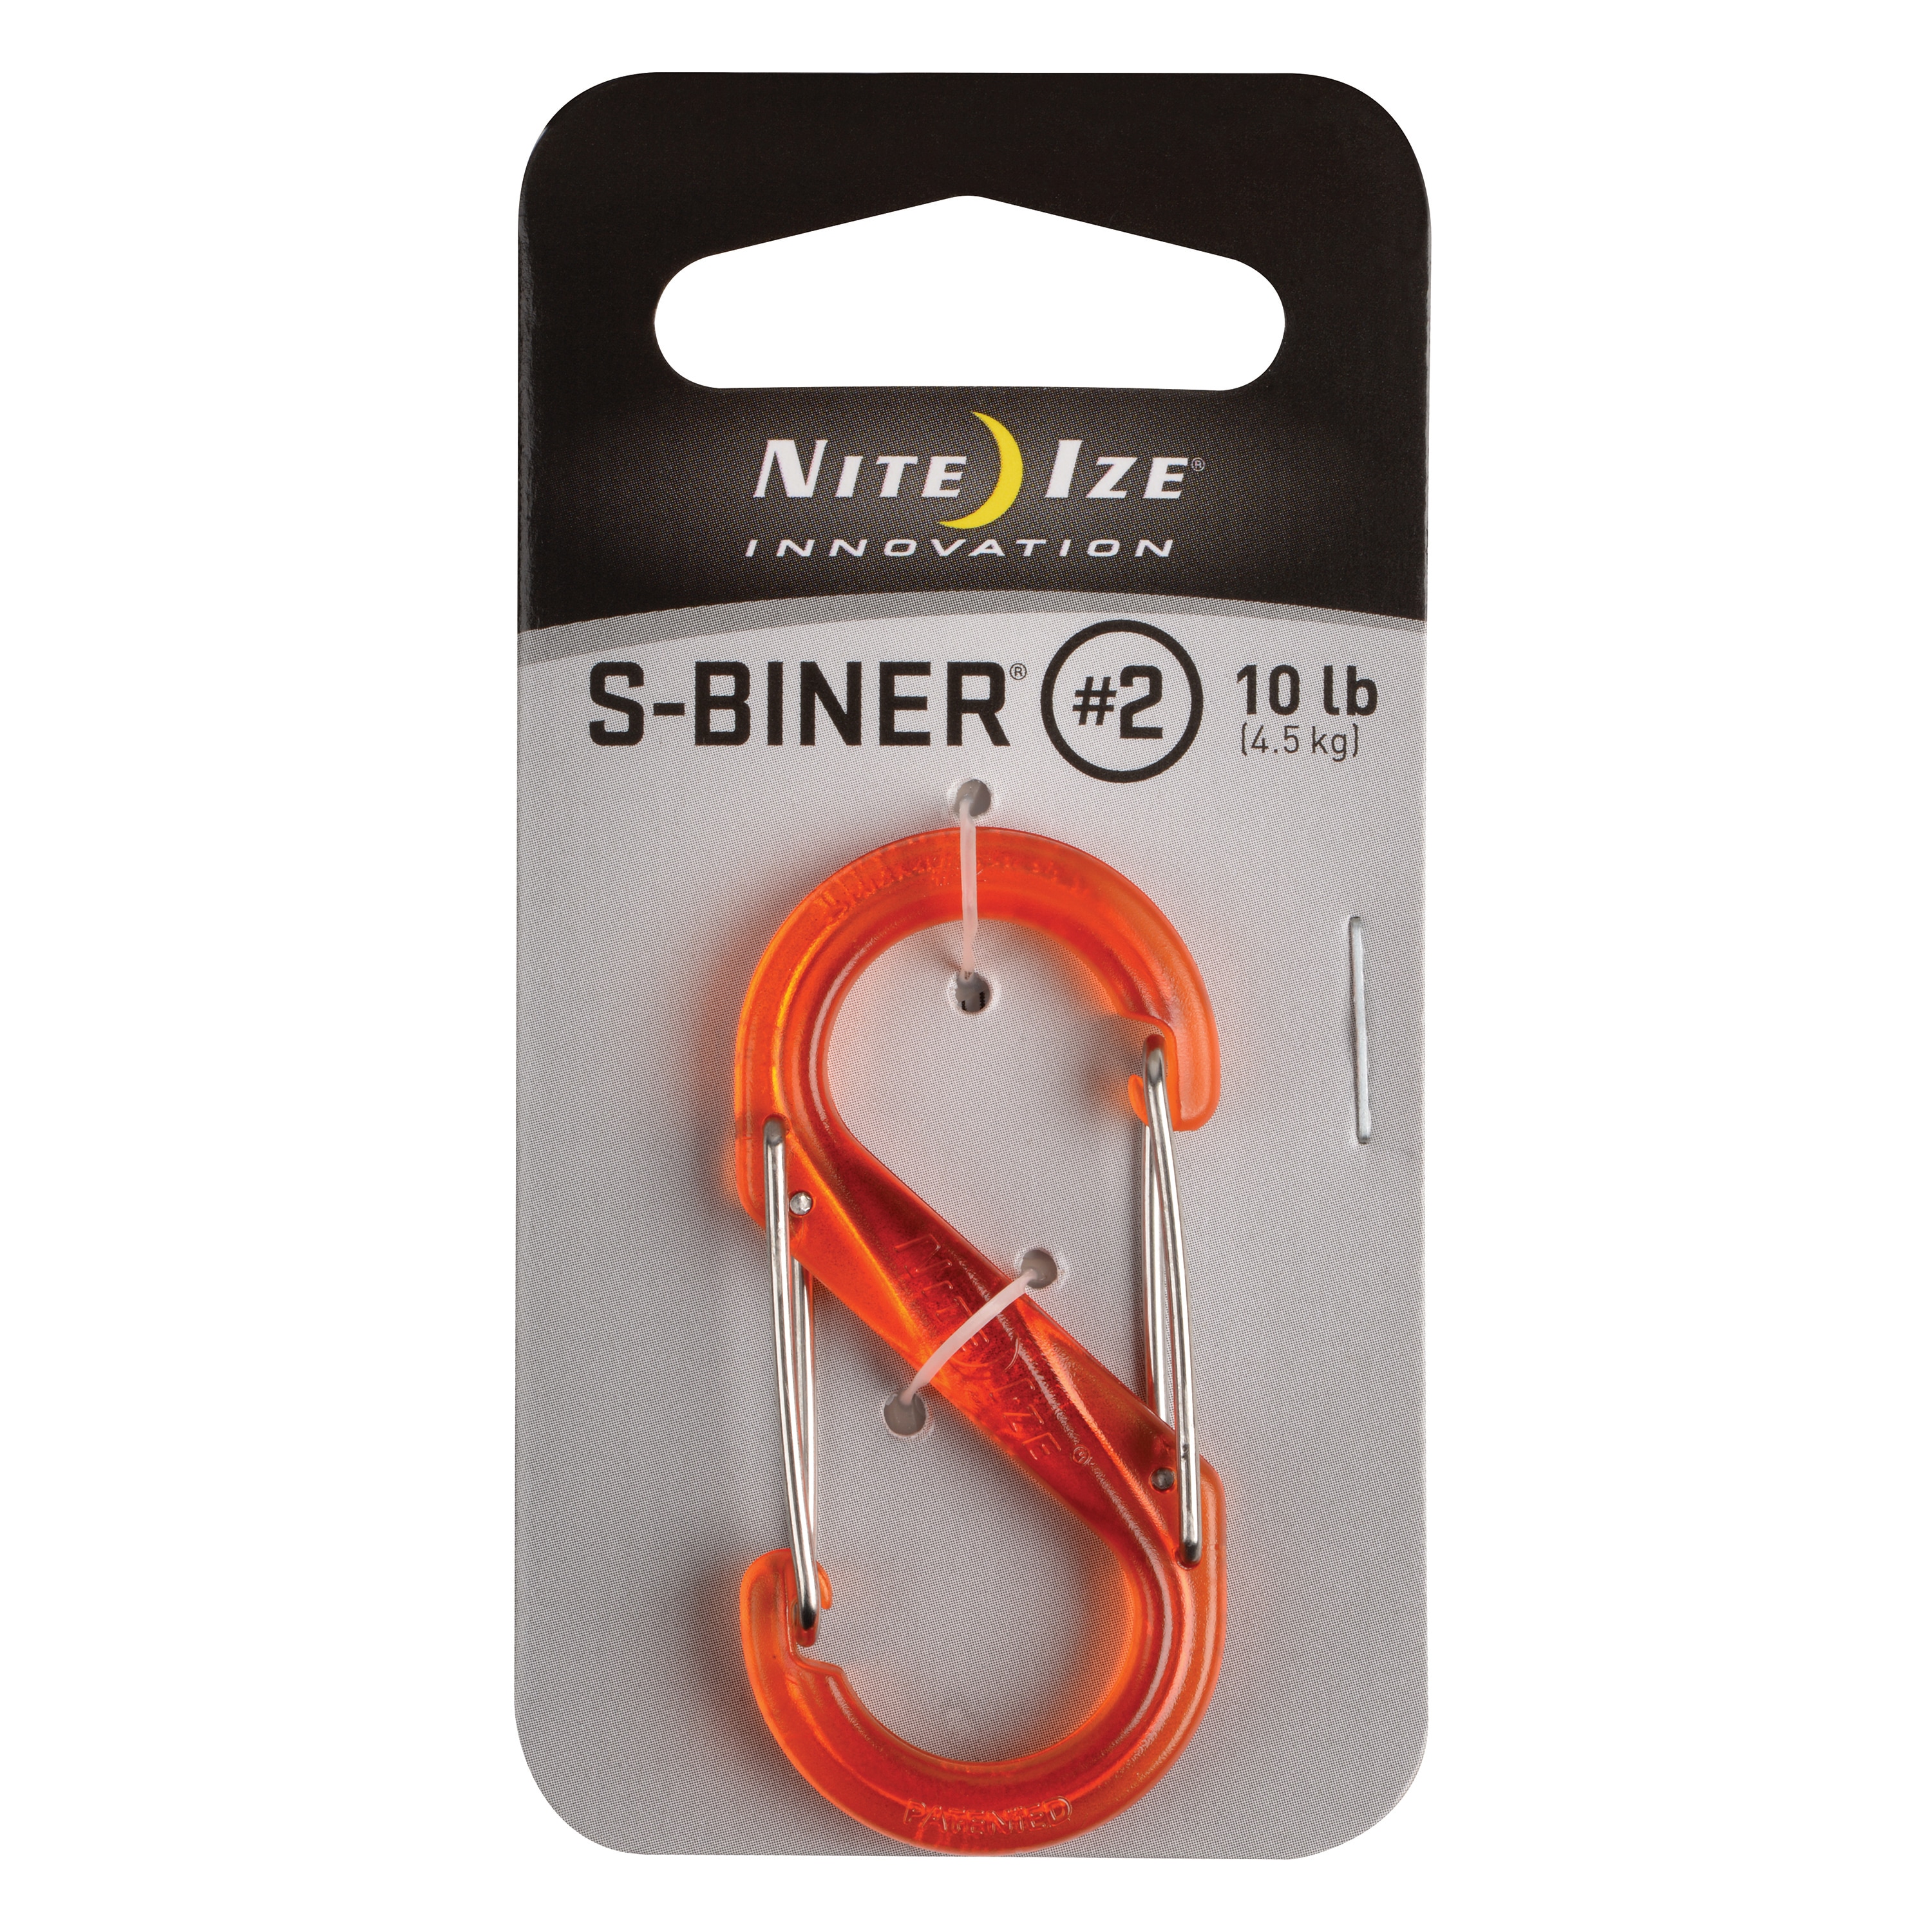 Nite Ize Durable Plastic S-Biner Keychain - Lightweight, Assorted Colors,  Secure Stainless Steel Closures - Perfect Key Accessory in the Key  Accessories department at